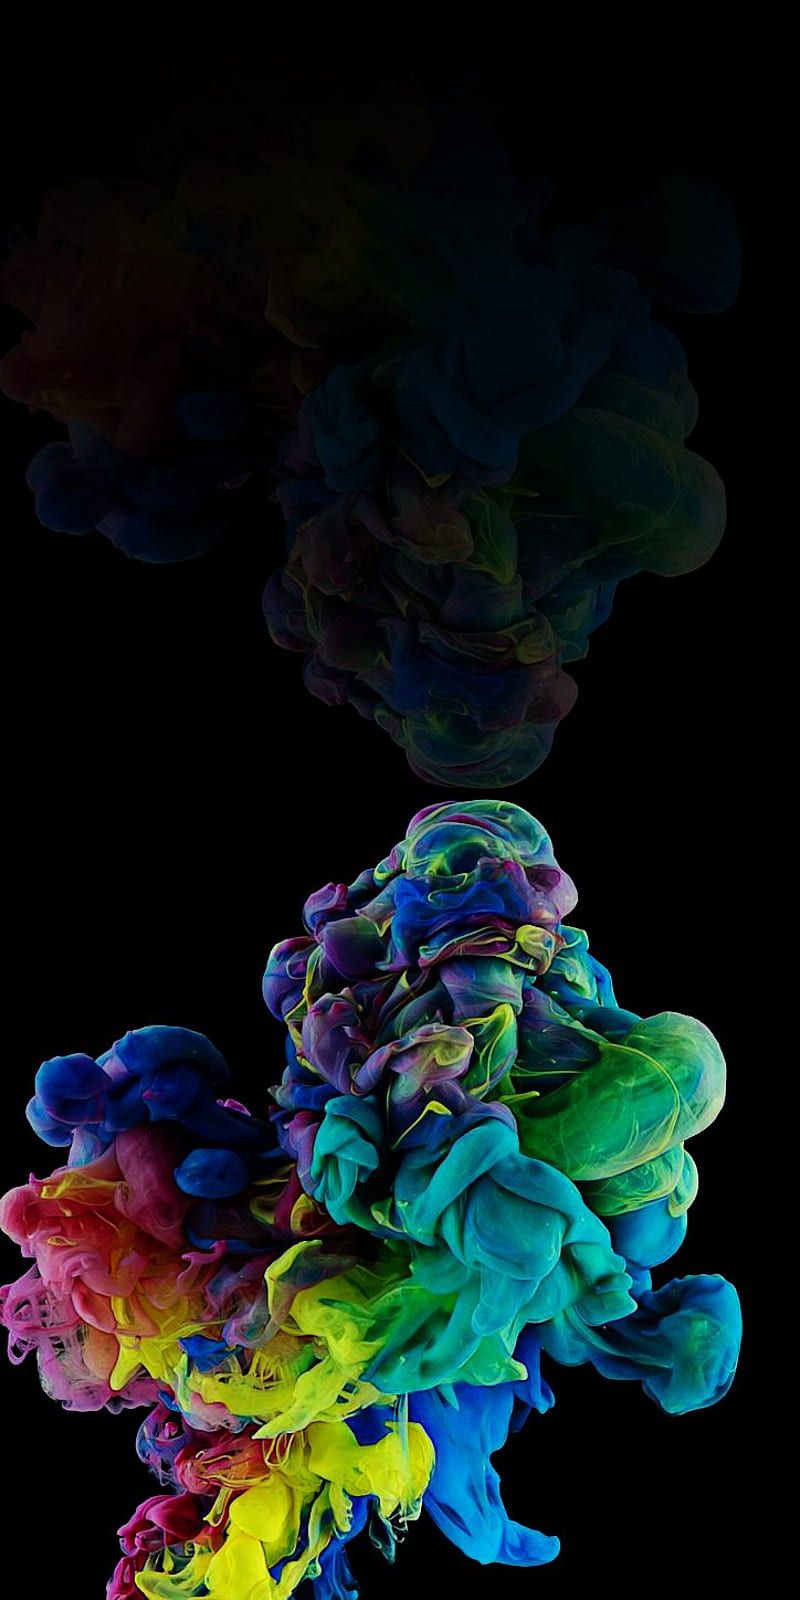 IPhone wallpaper of colorful ink in water against a black background - Psychedelic